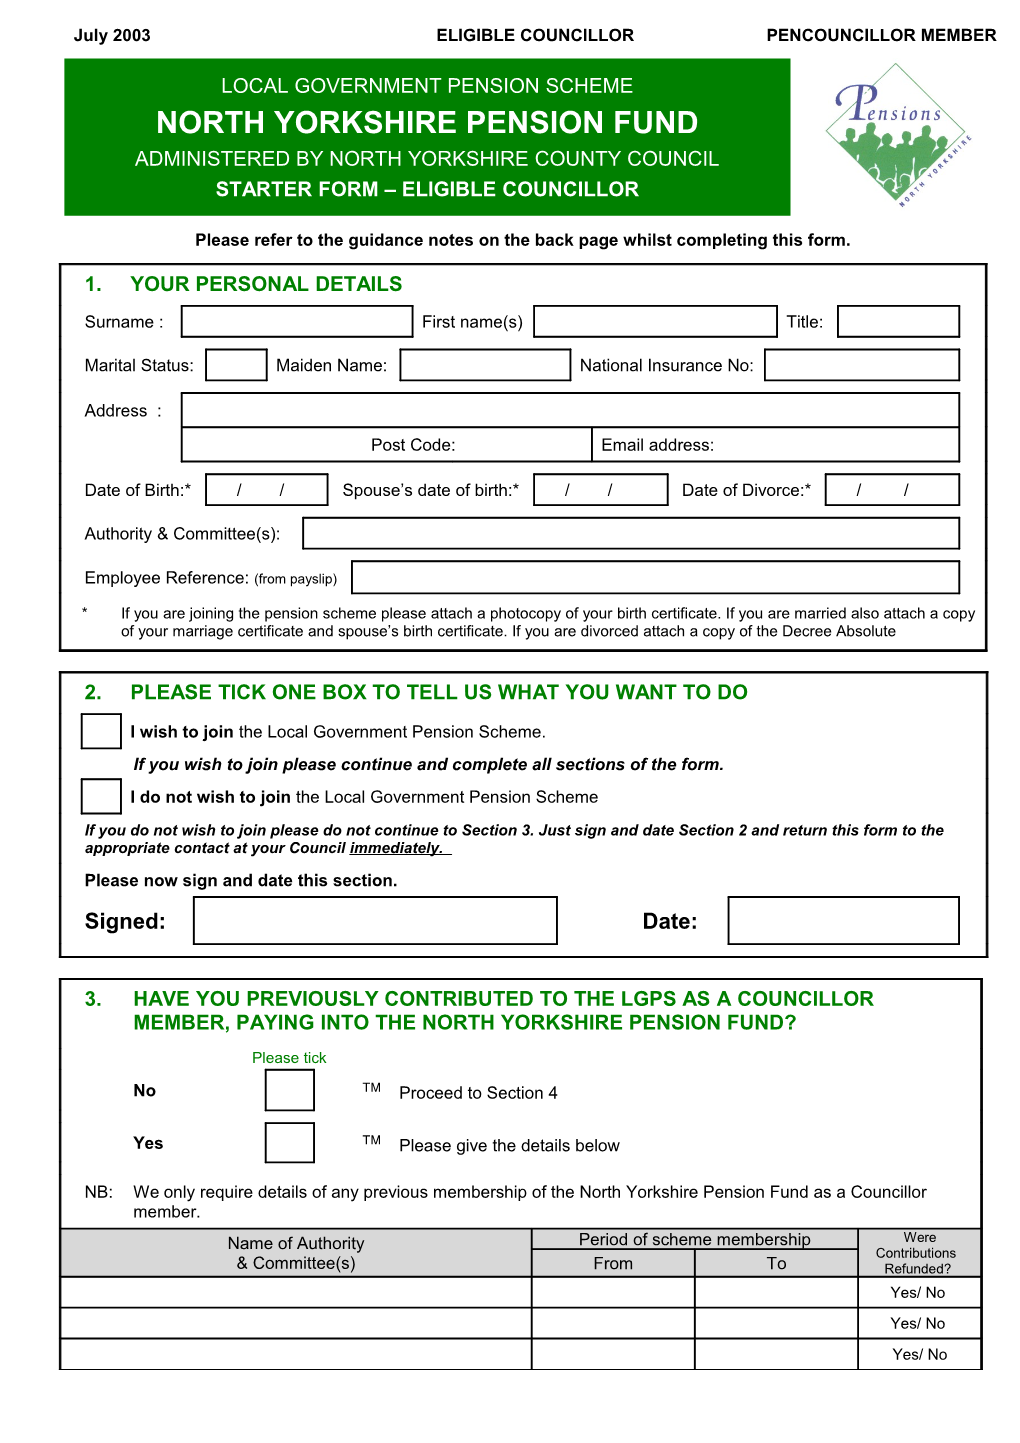 Please Return This Form to the Appropriate Contact at Your Council